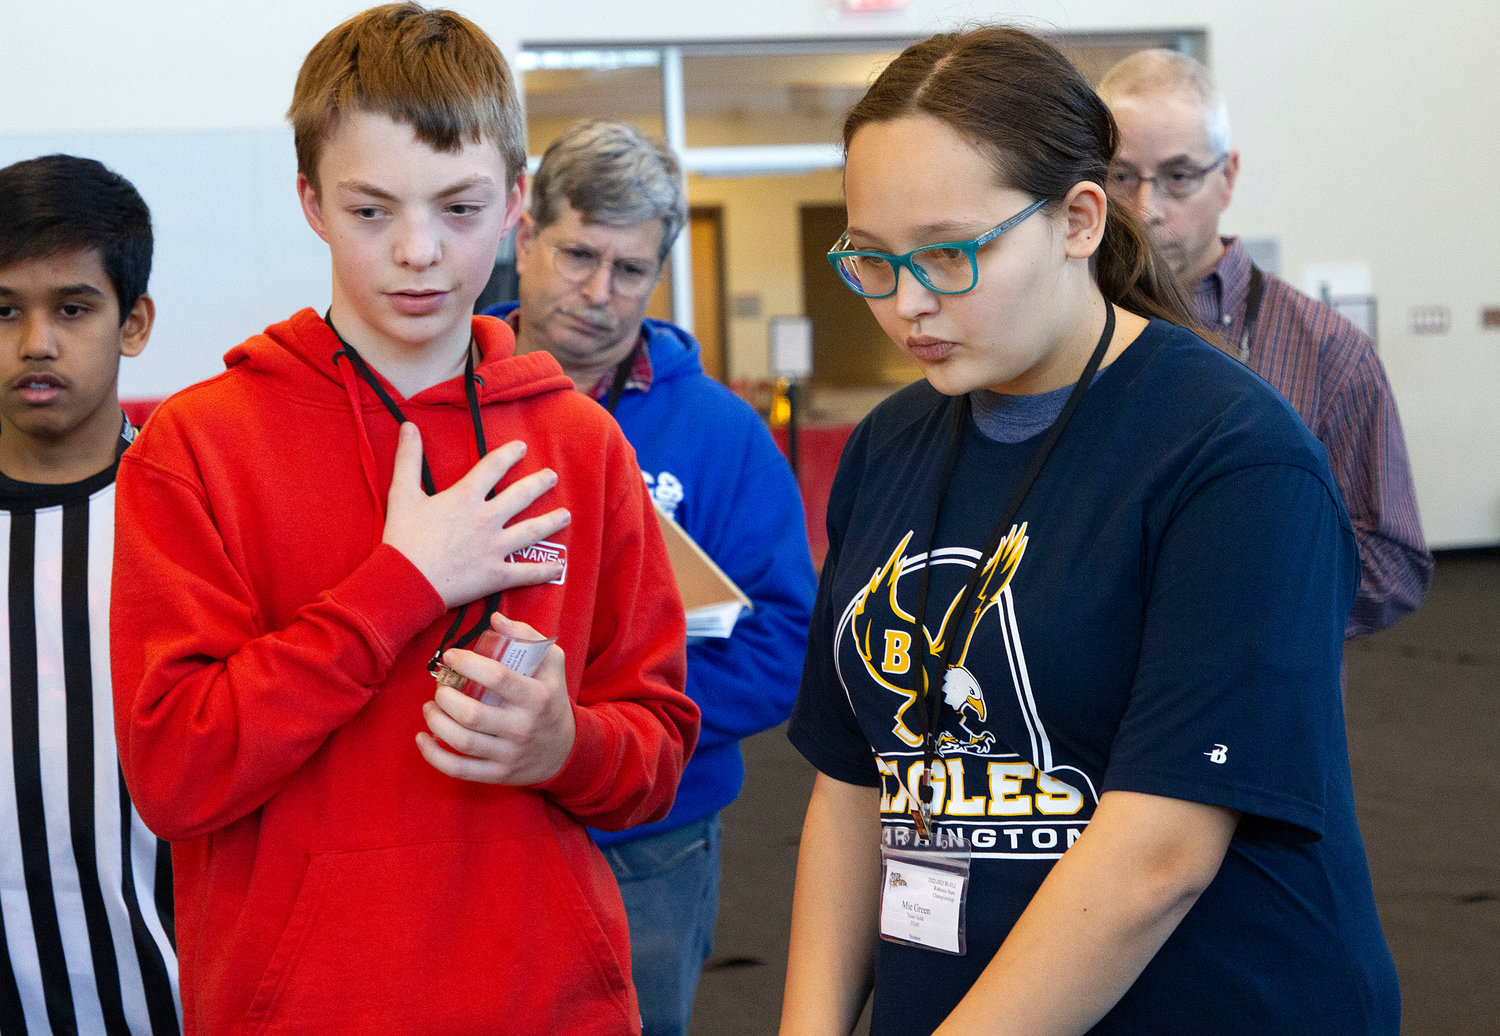 Barrington Middle School's Tripp Spencer (left) and Mie Green work together during the competition.